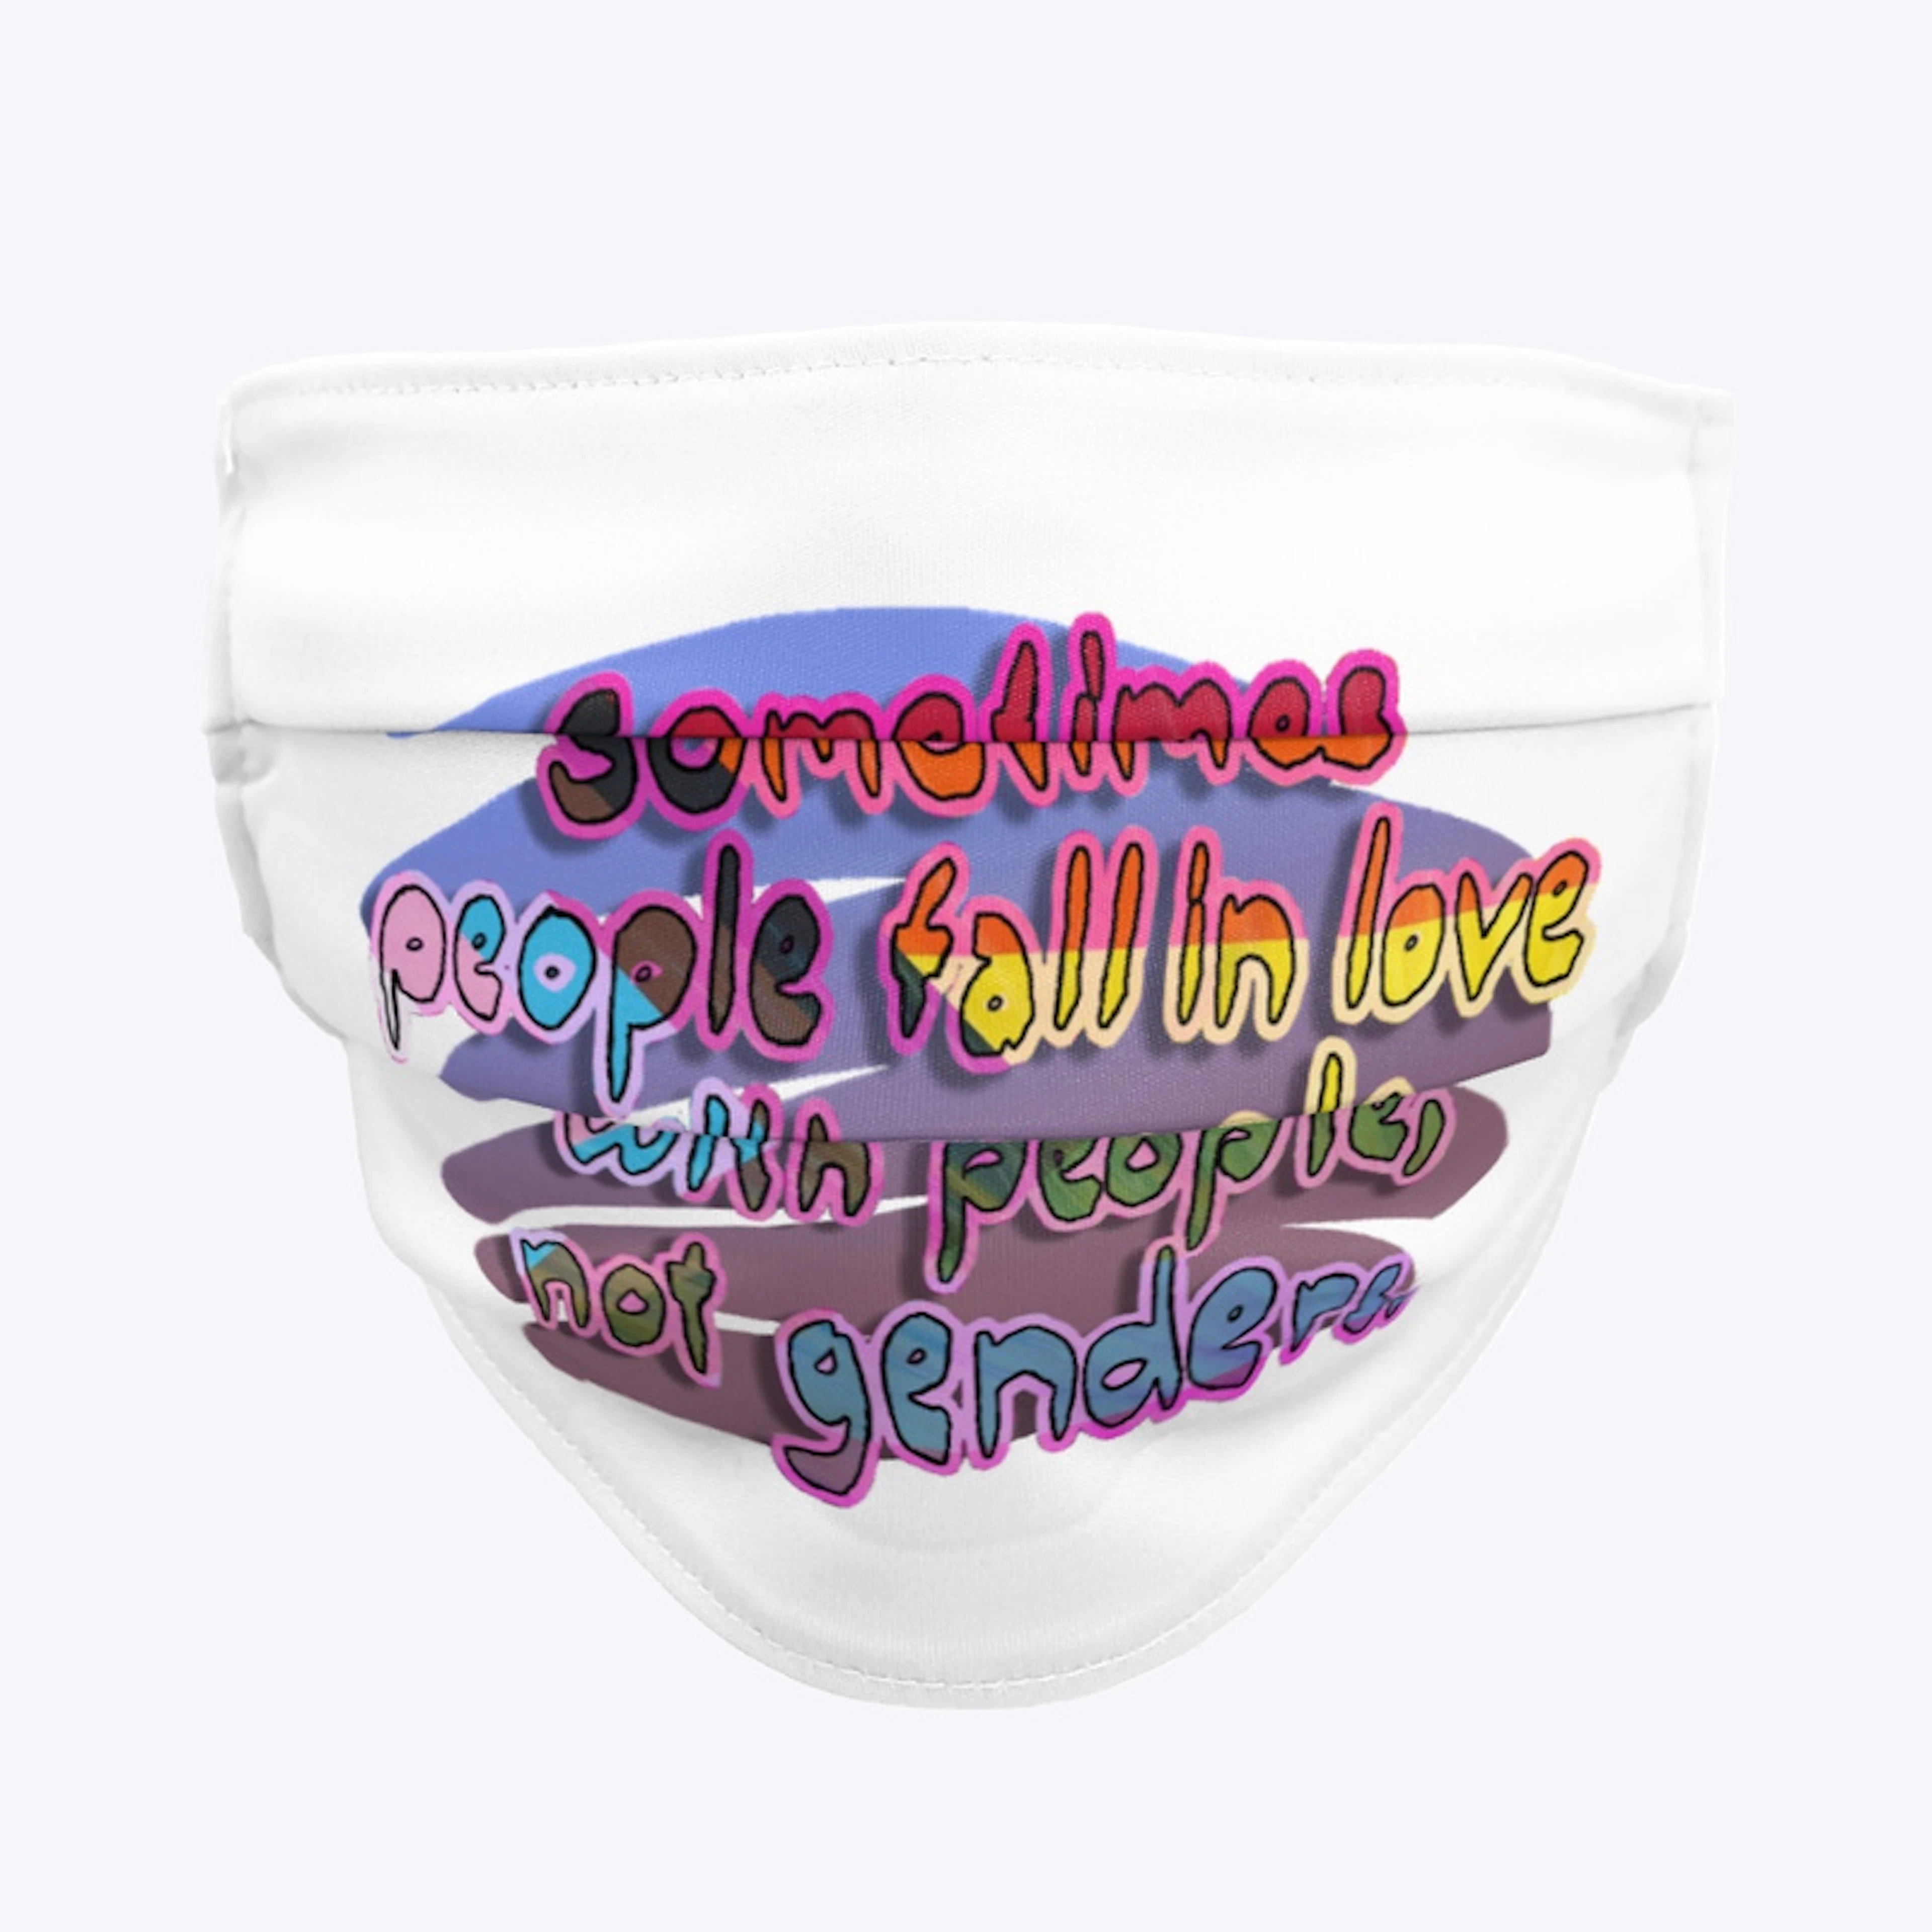 Love is Love Mask